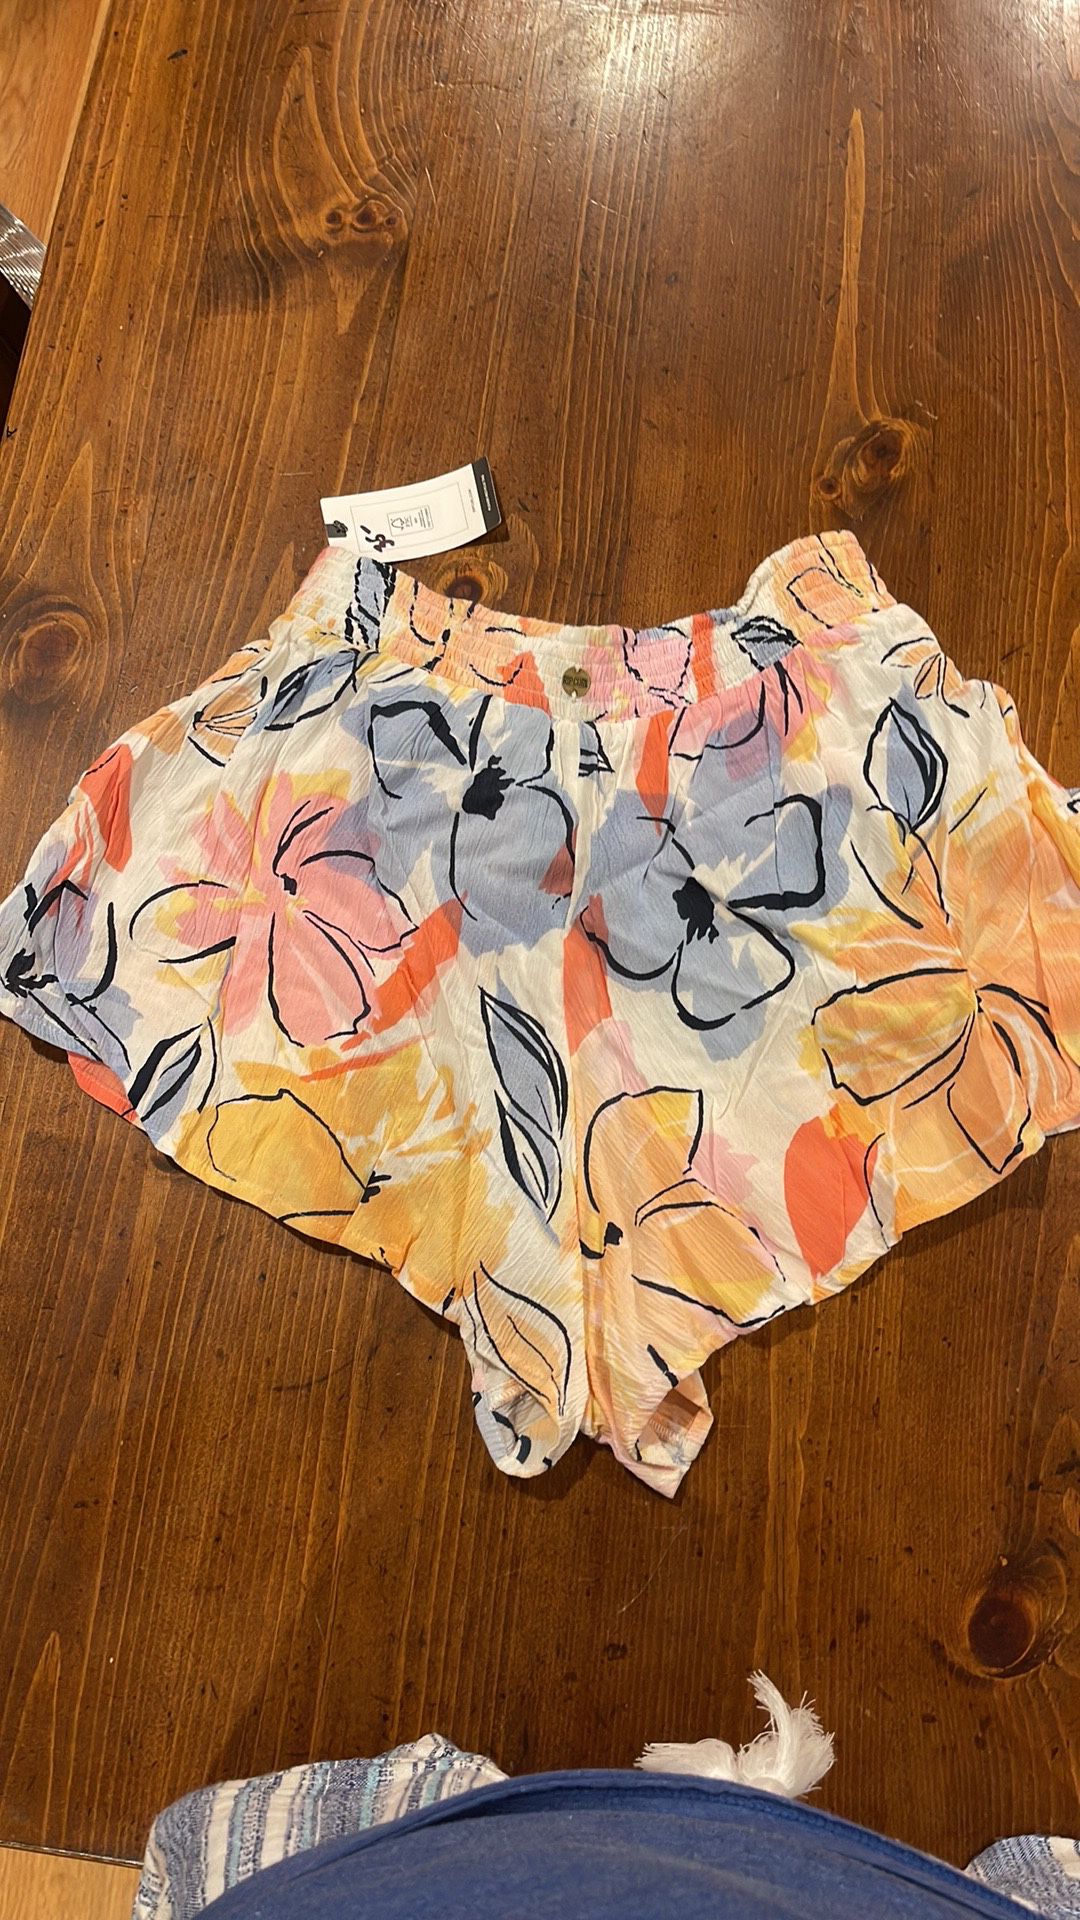 Rip Curl Bloom Shorts- please feel free to make a reasonable offer